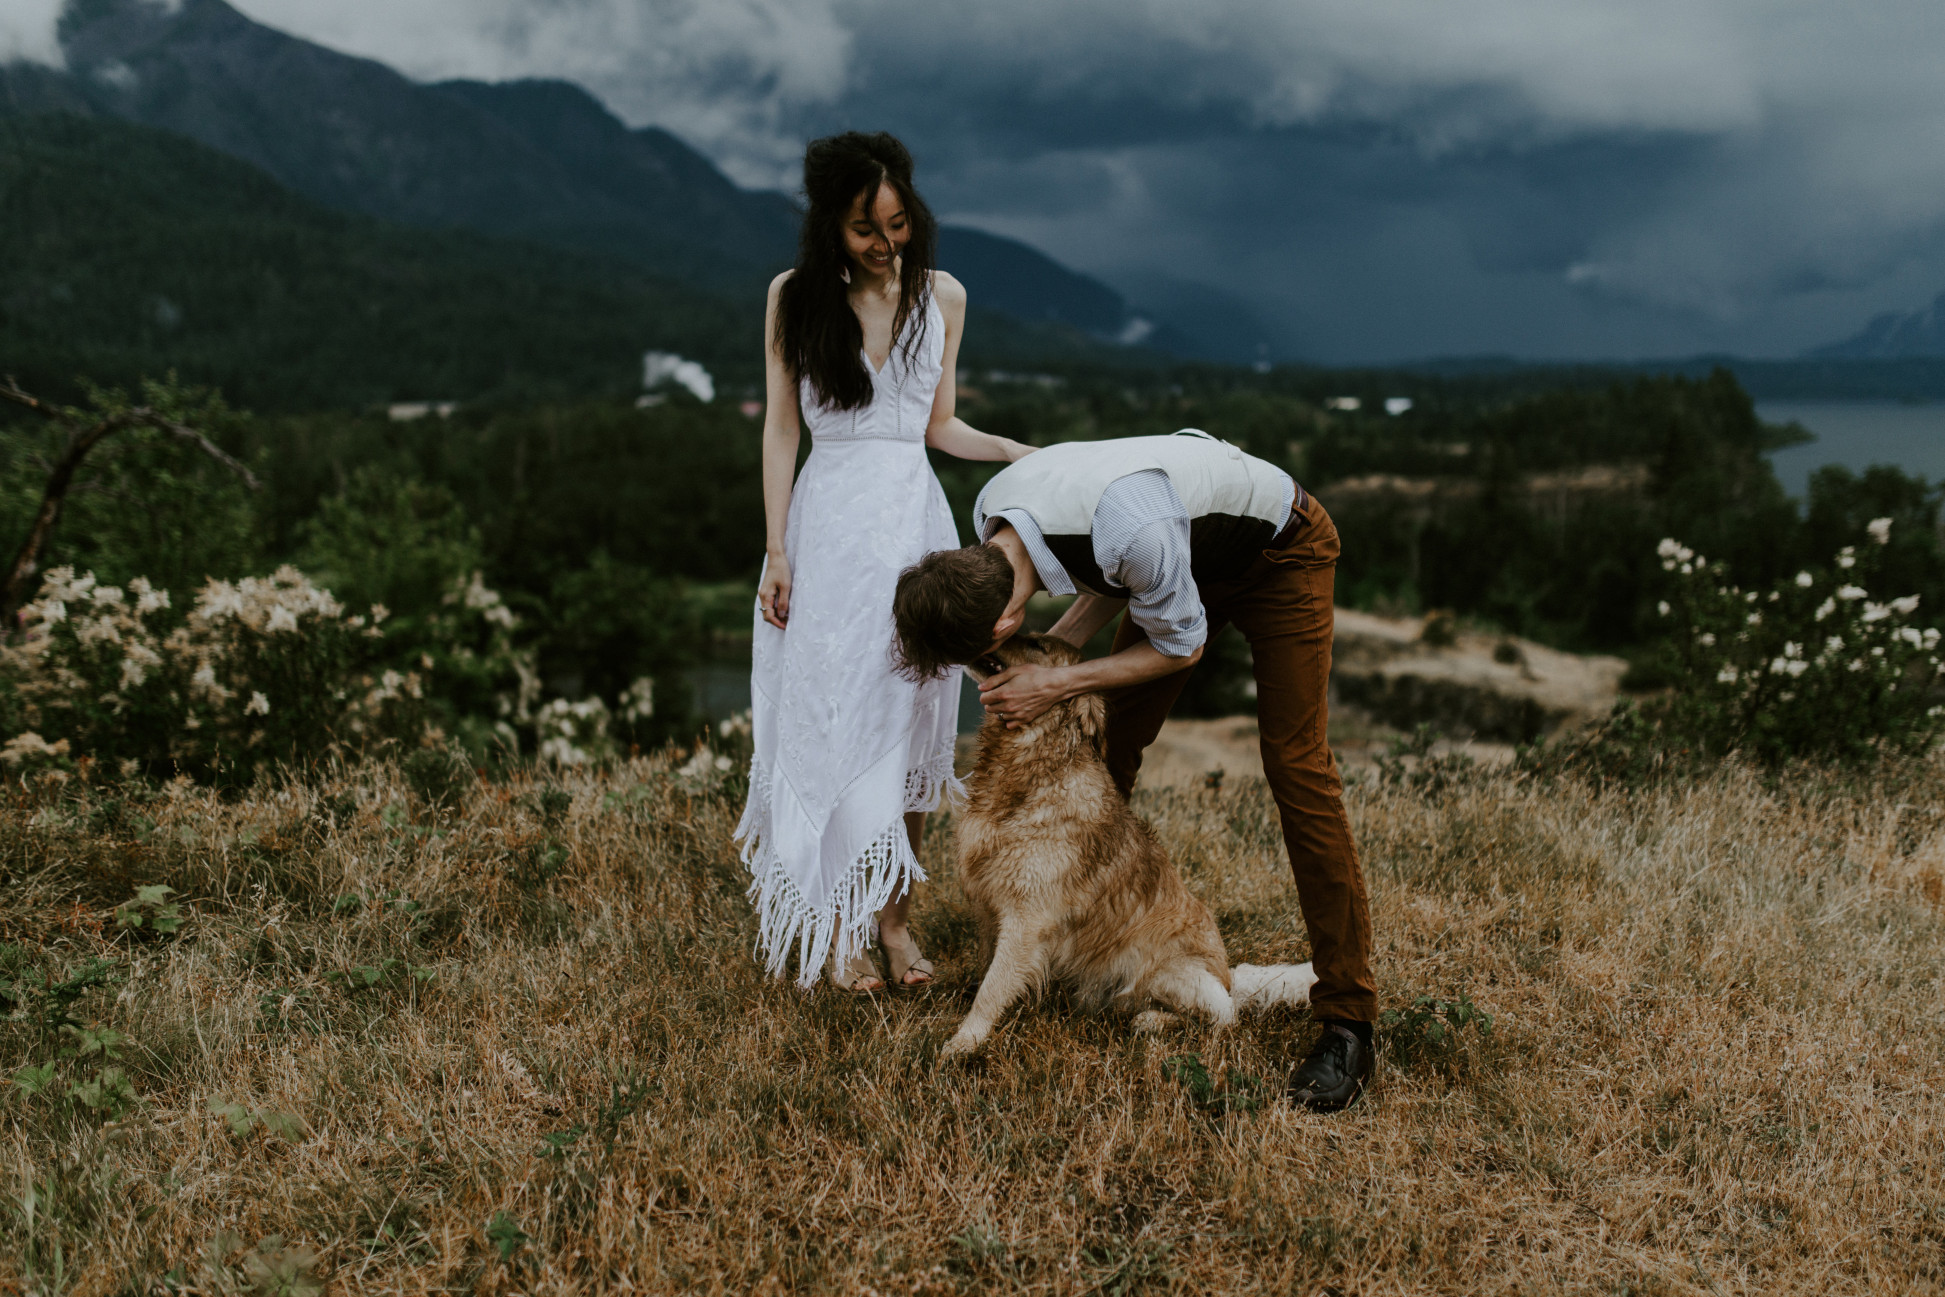 Kimberlie and Jacob admire their dog Cody at Cascade Locks, OR. Elopement wedding photography at Cascade Locks by Sienna Plus Josh.